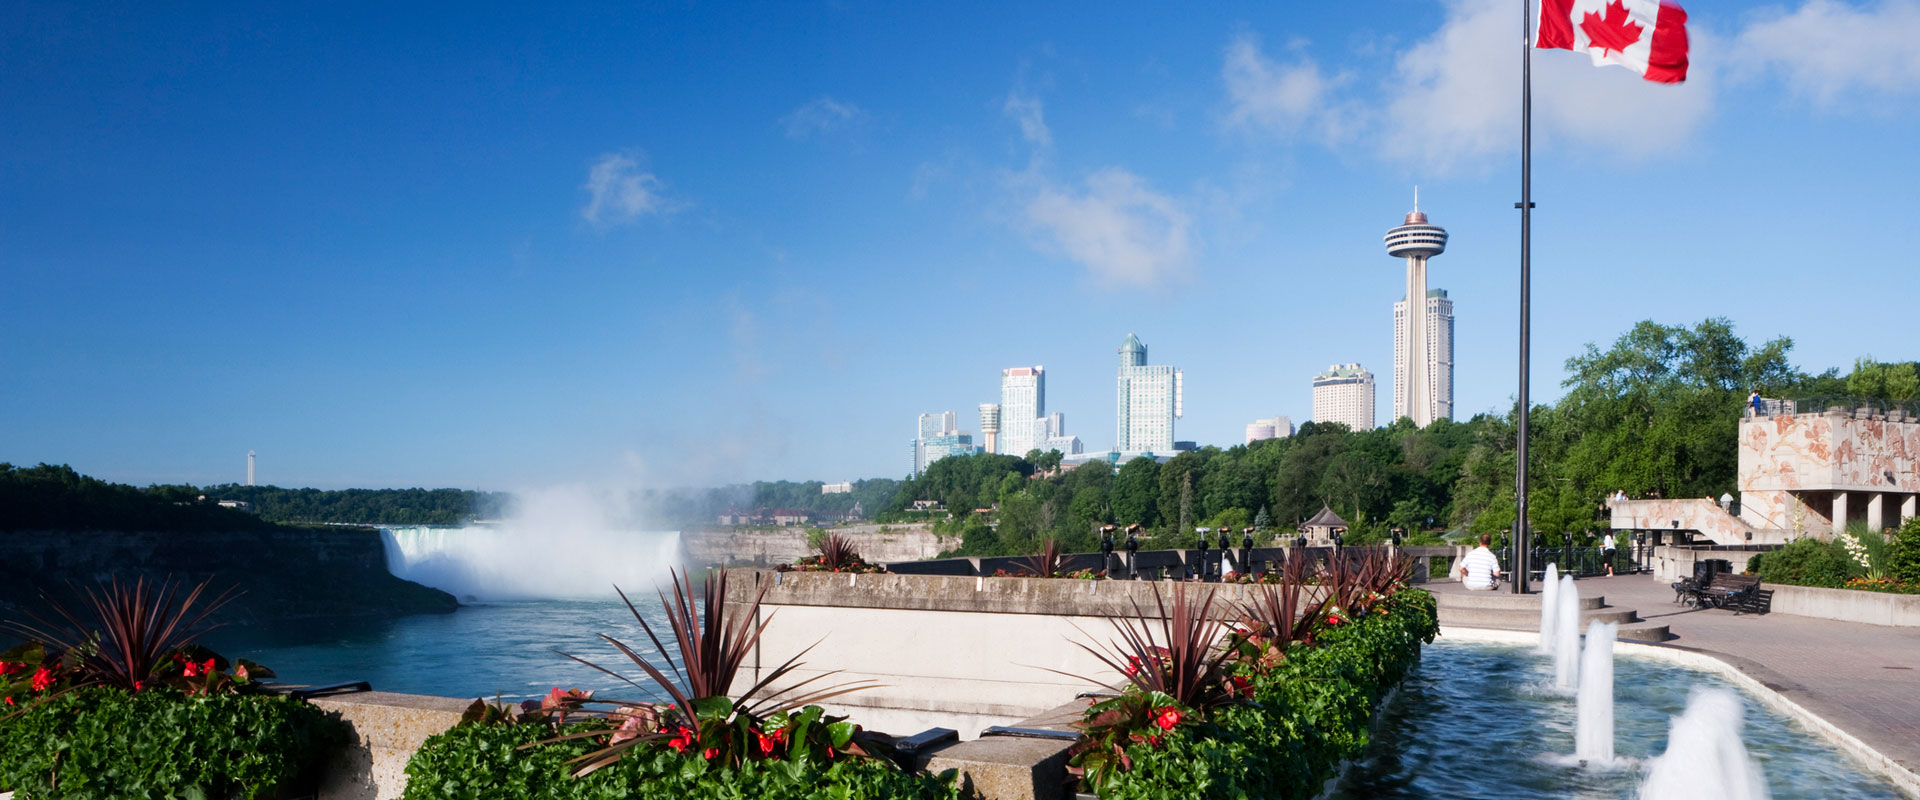 What Is The Best Tour Of Niagara Falls